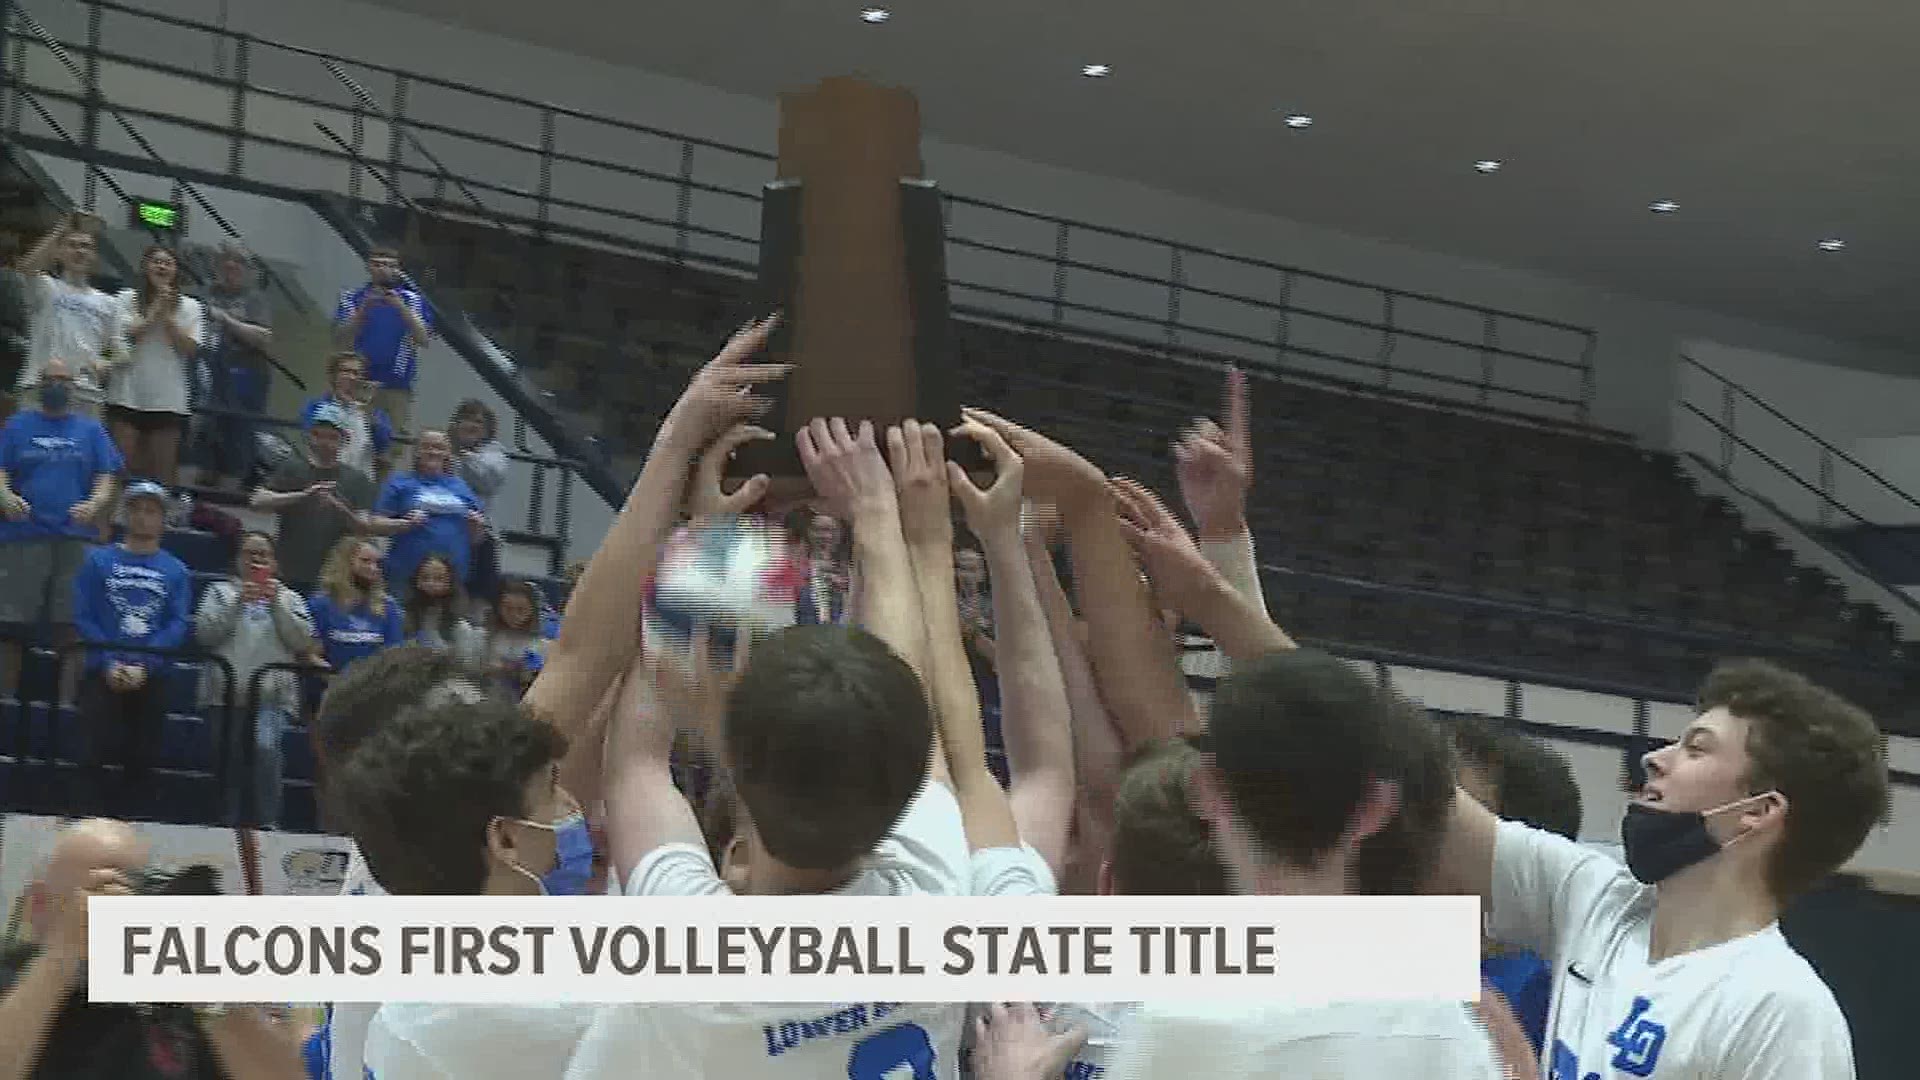 Lower Dauphin Claims First State Volleyball title, Central Dauphin ends as state runner-up to North Allegheny